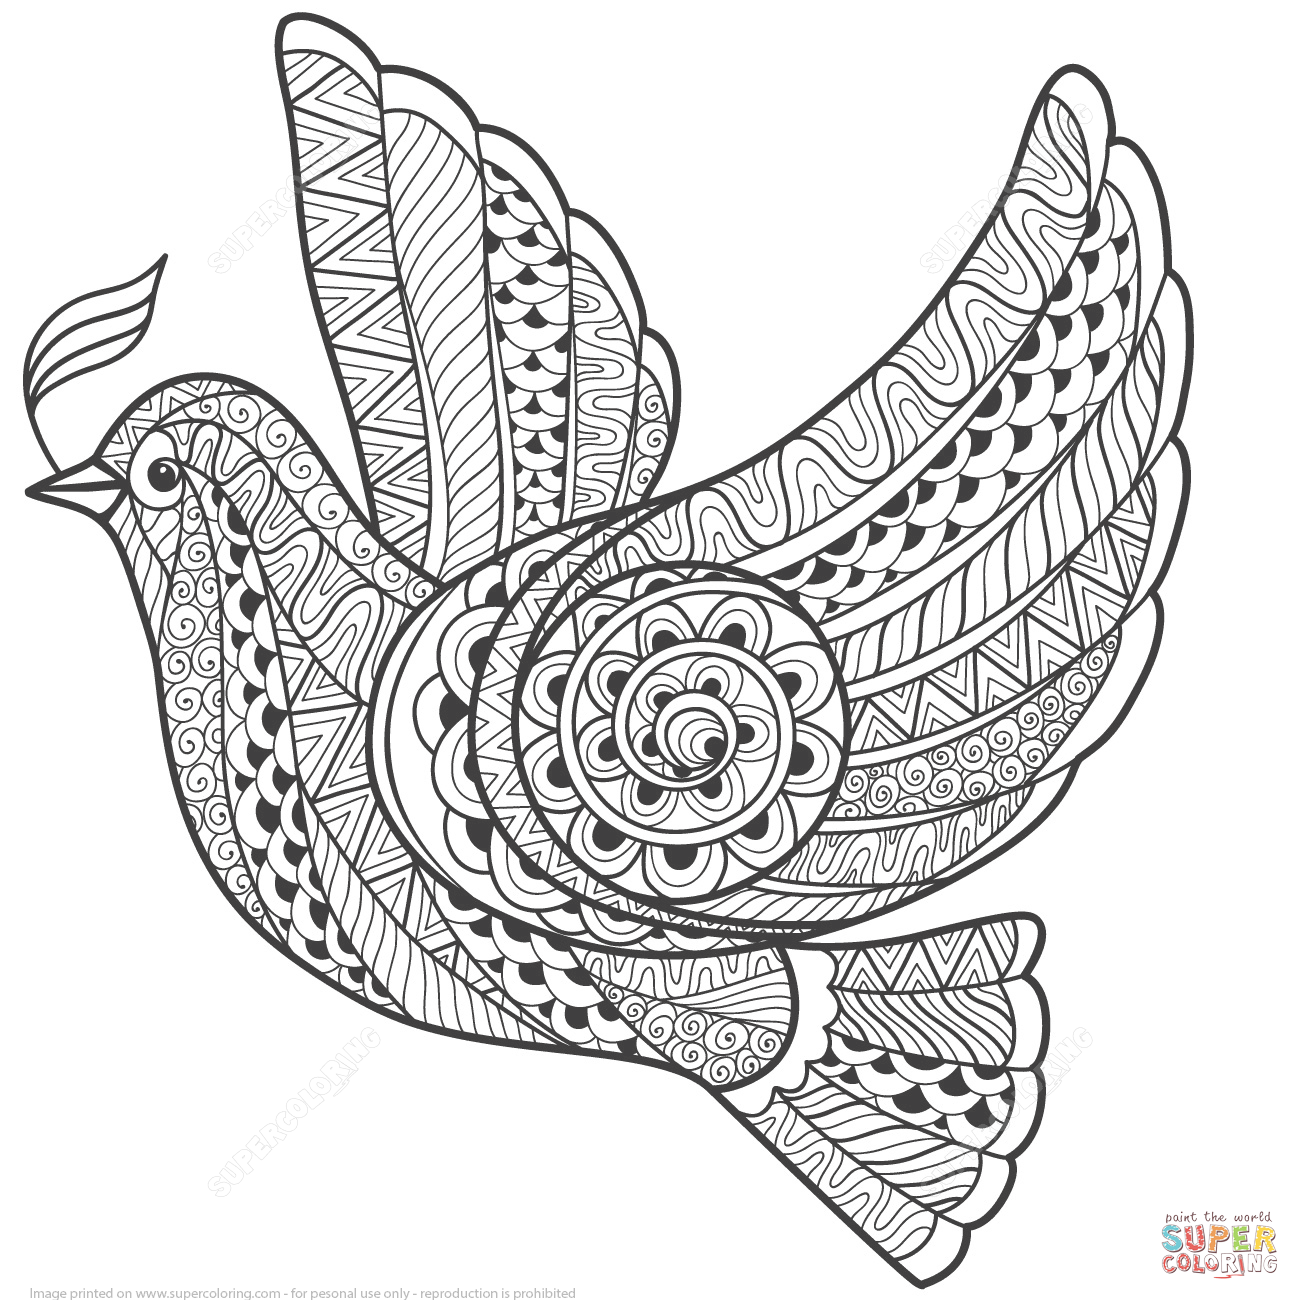 Free Zentangle Coloring Pages, Download Free Clip Art, Free ...